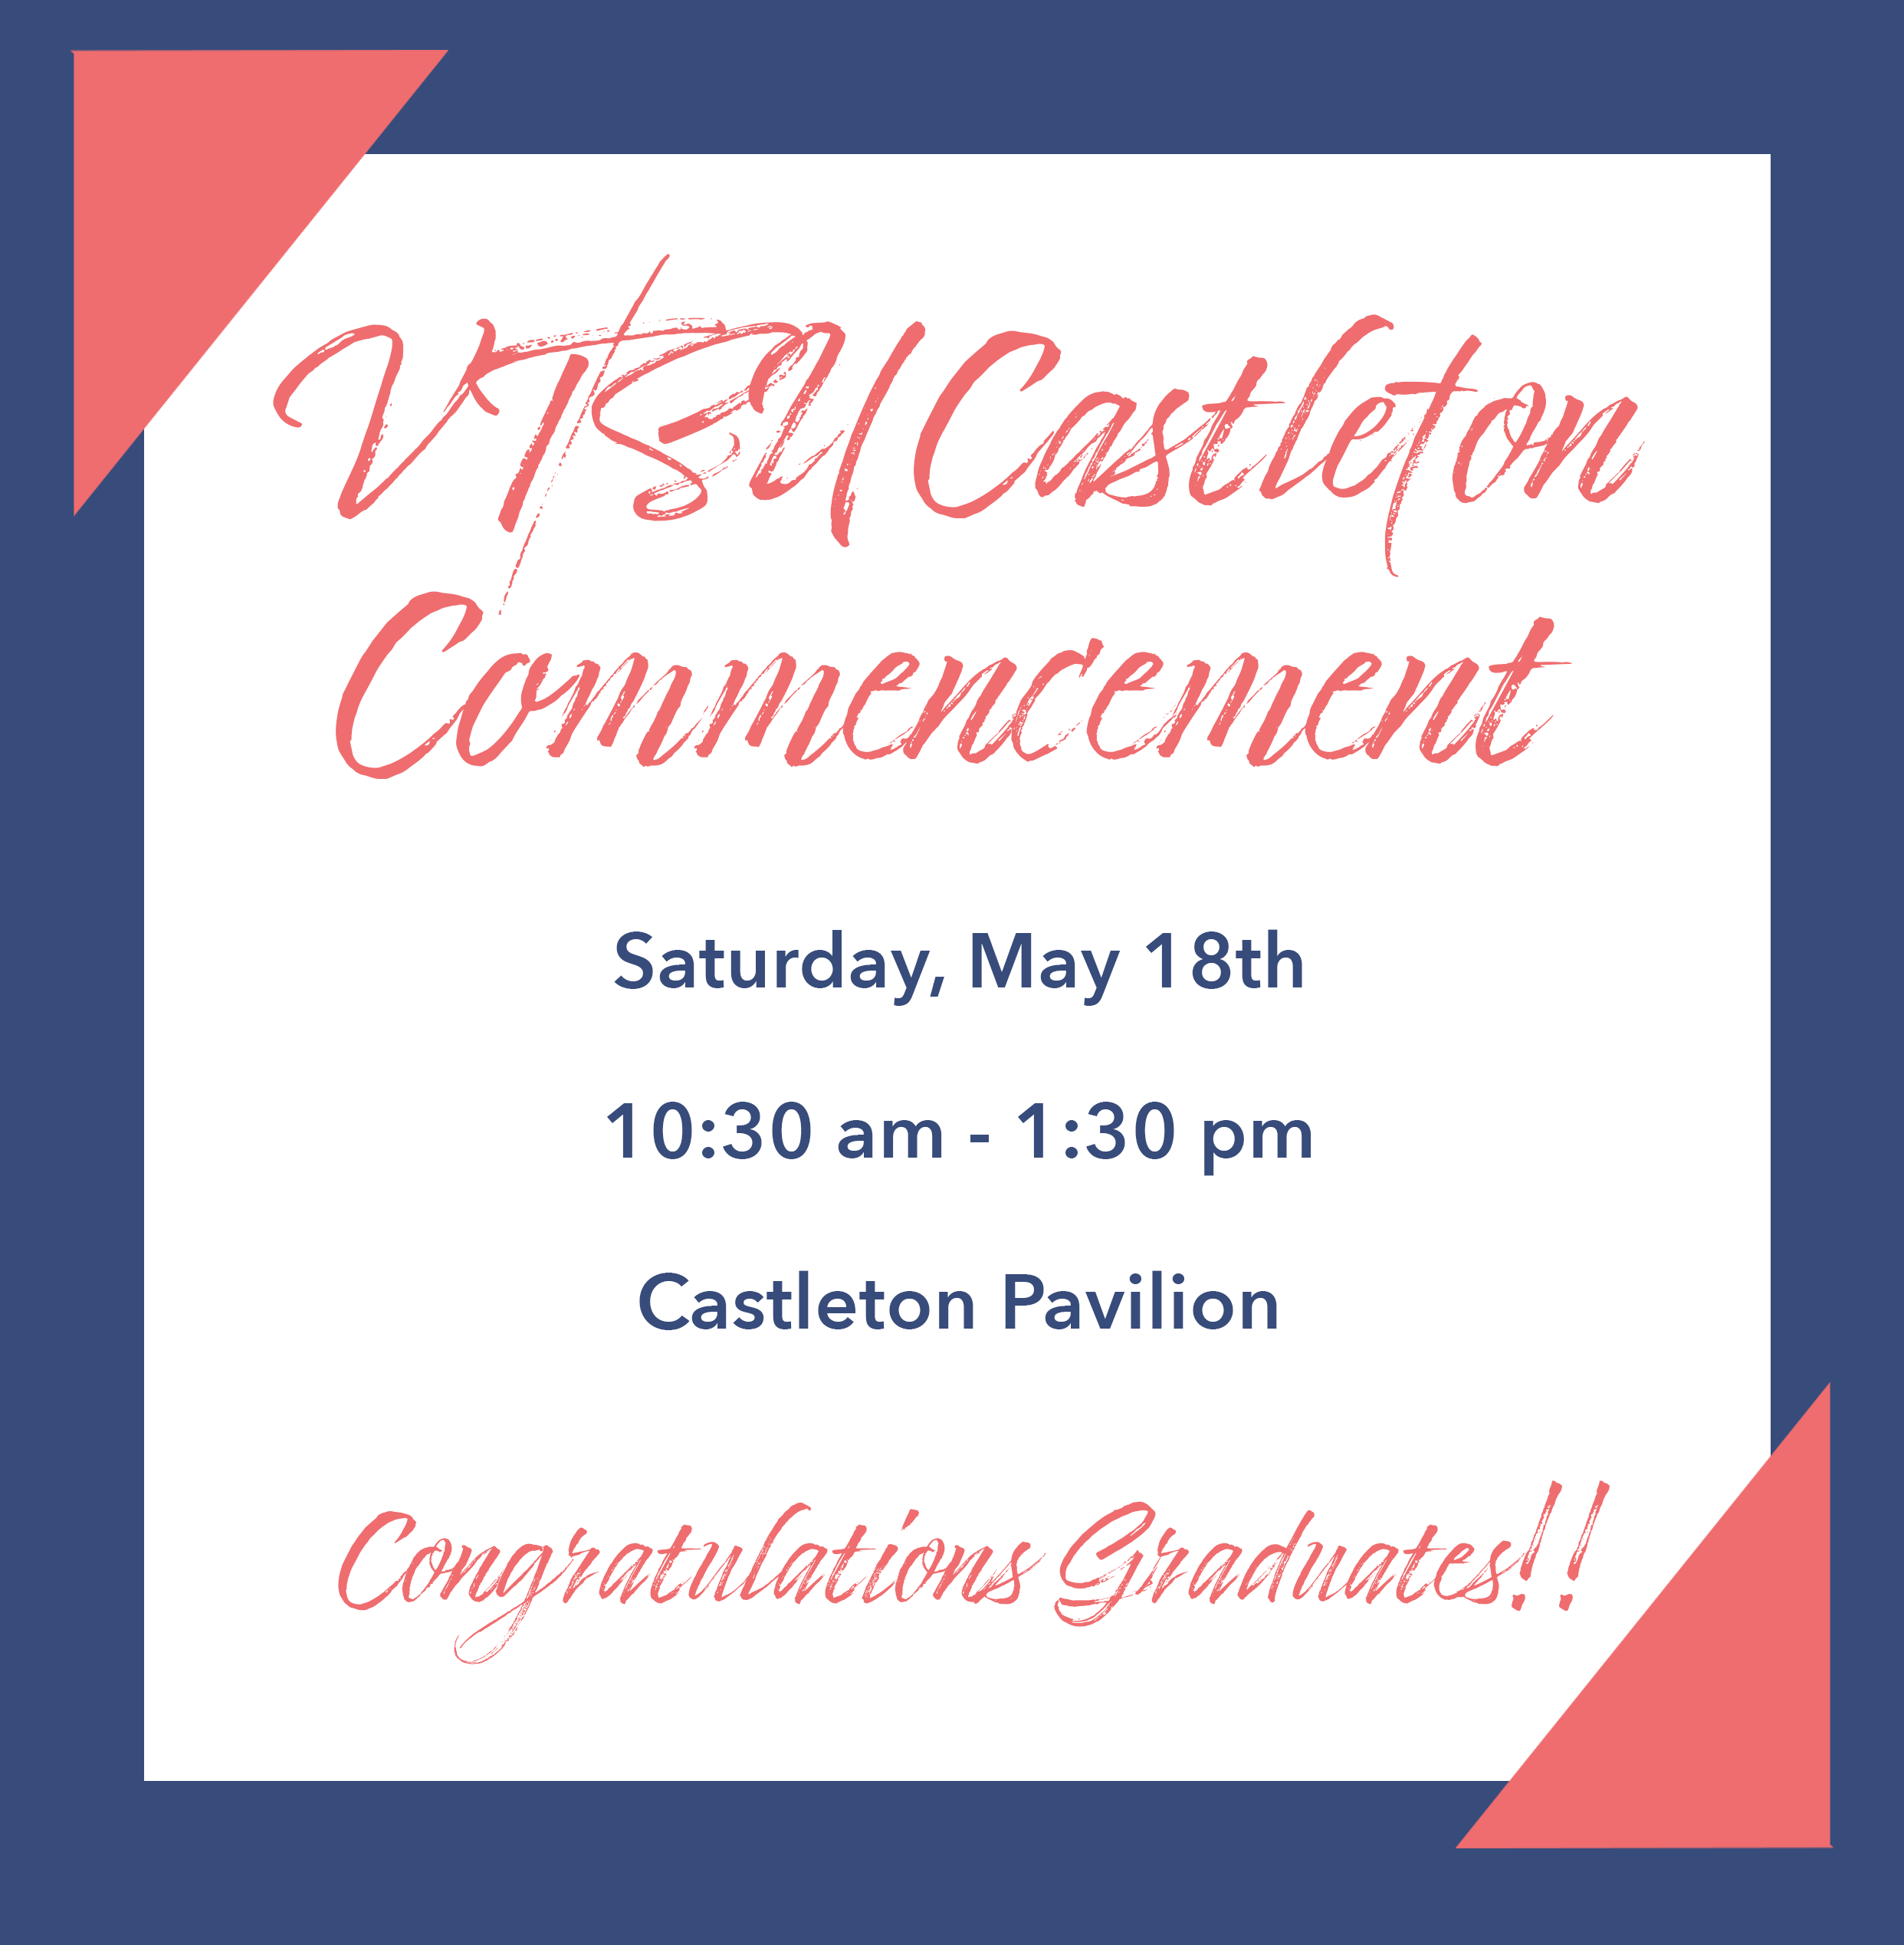 VTSU Castleton Presents: Commencement!! Saturday, May 18th  10:30 am – 1:30 pm Castleton Pavilion Congratulations Graduates!! On Navy/White Background in Red text